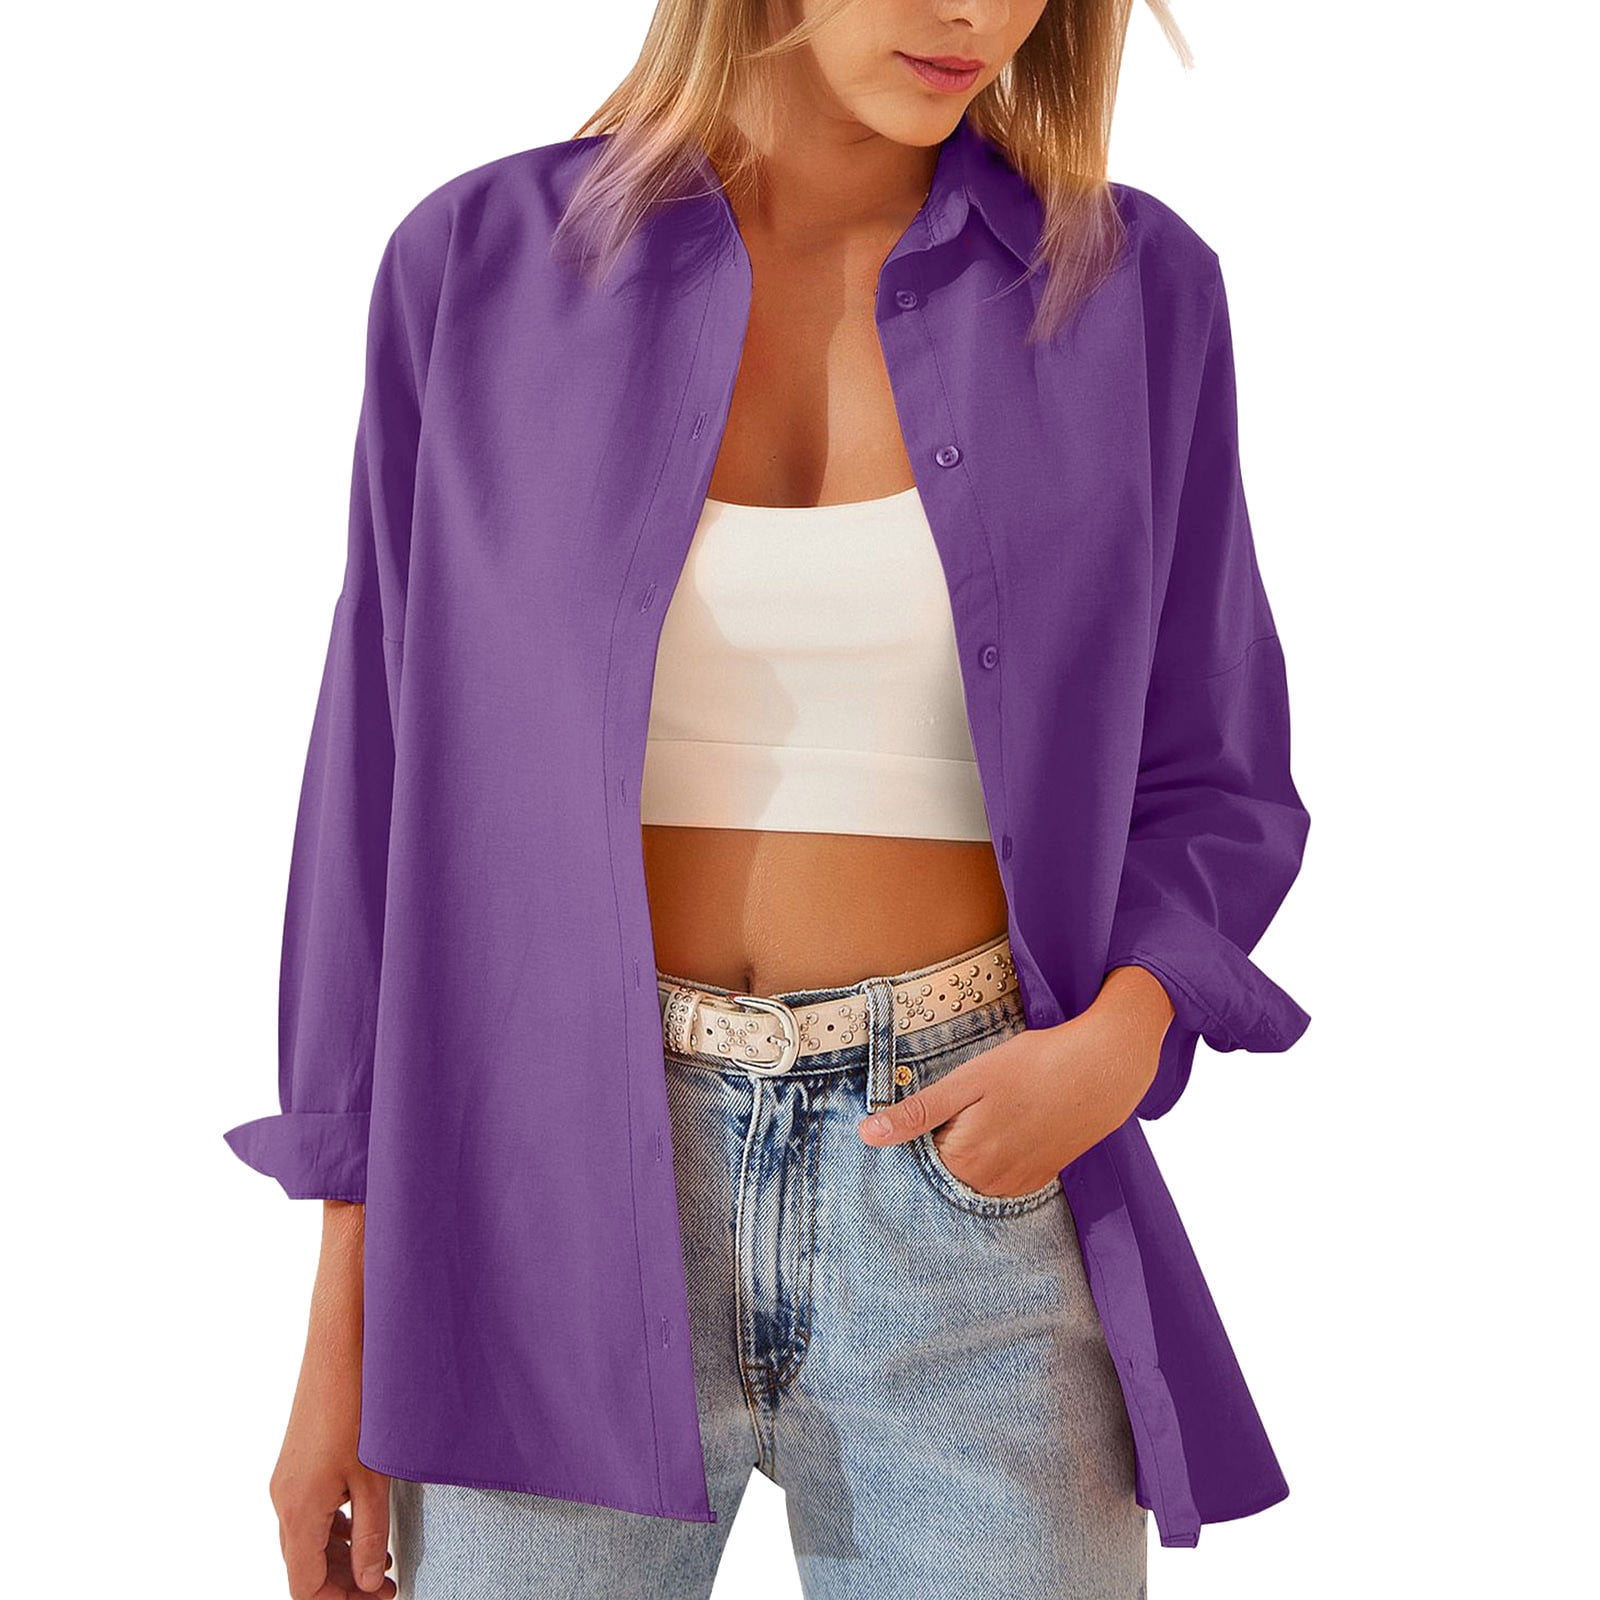 PMUYBHF Womens Fashion Women Long Sleeve Lapel Cardigan Top Solid Color  Loose Fashion Casual Shirt Cotton Long Sleeve Shirt Women Fitted Plus Size  Tops for Women 3/4 Sleeve 13.99 